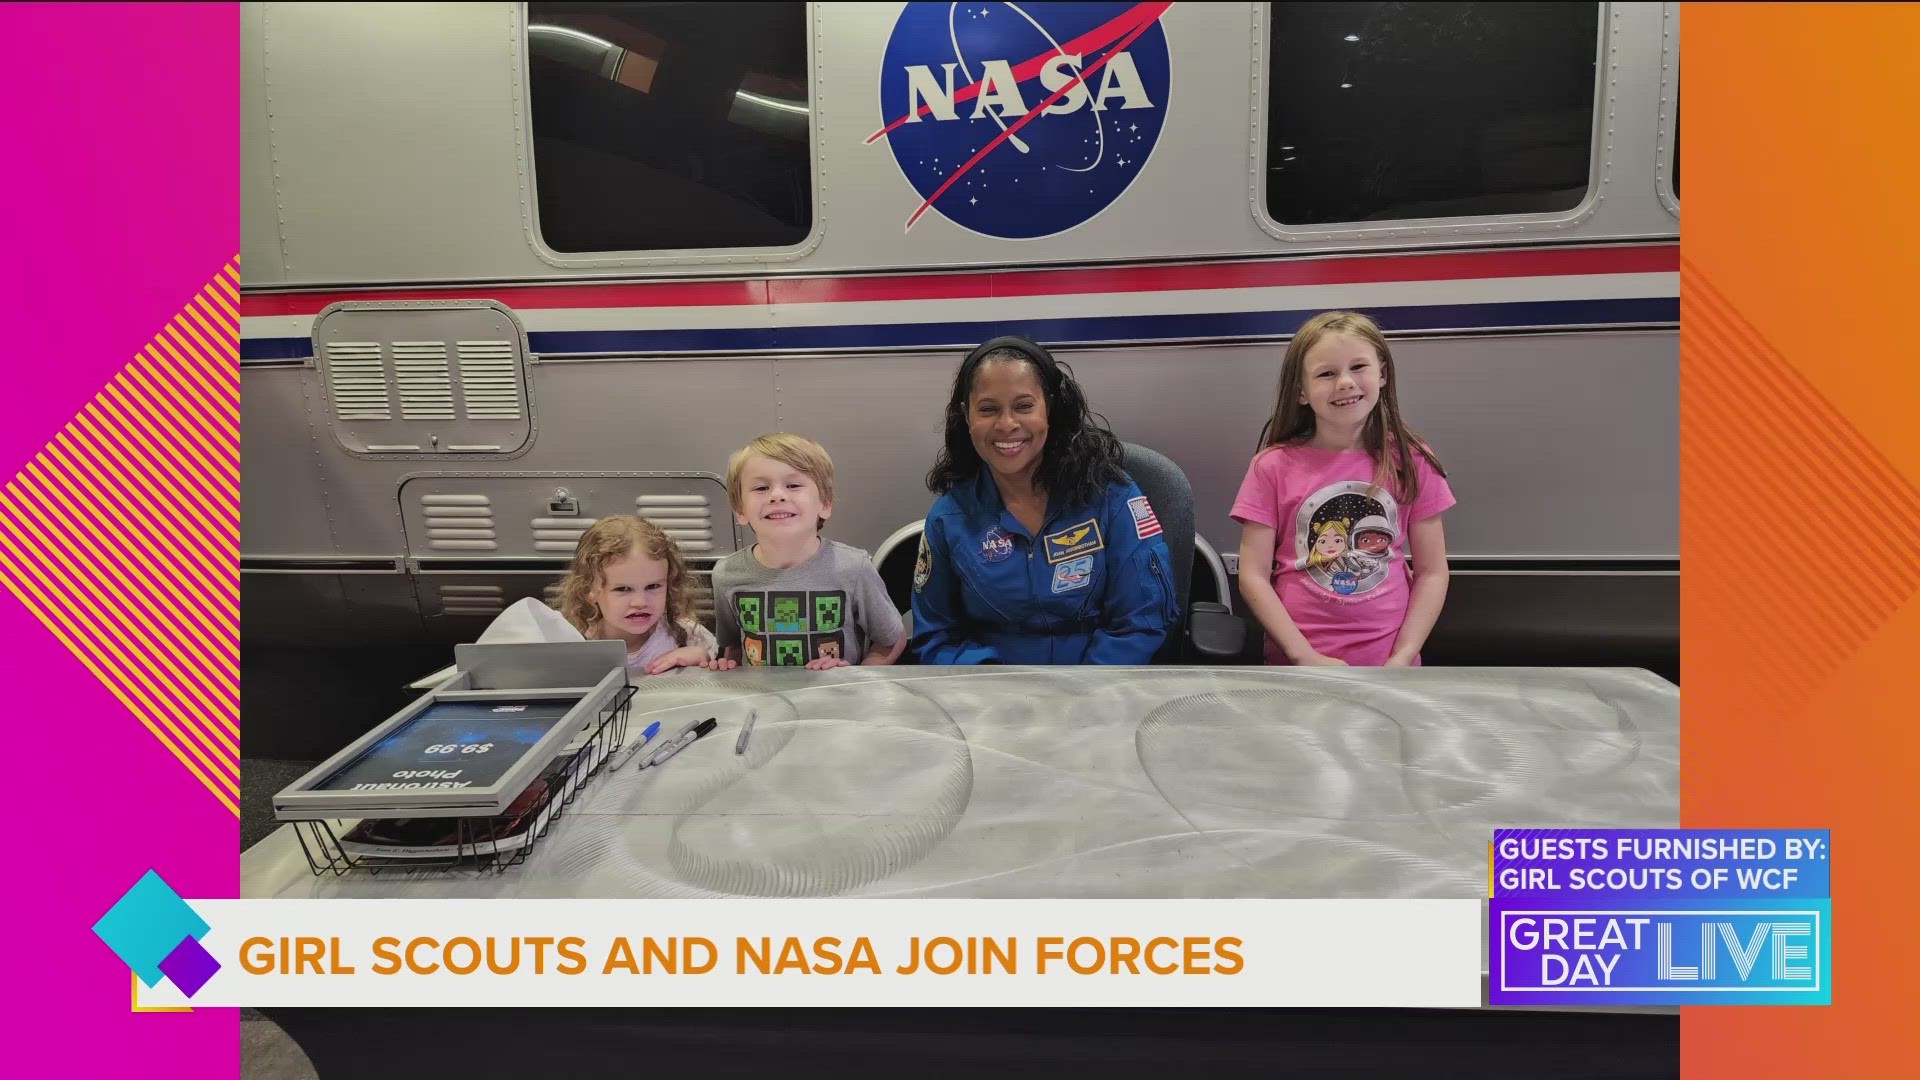 Girl Scouts and NASA join forces